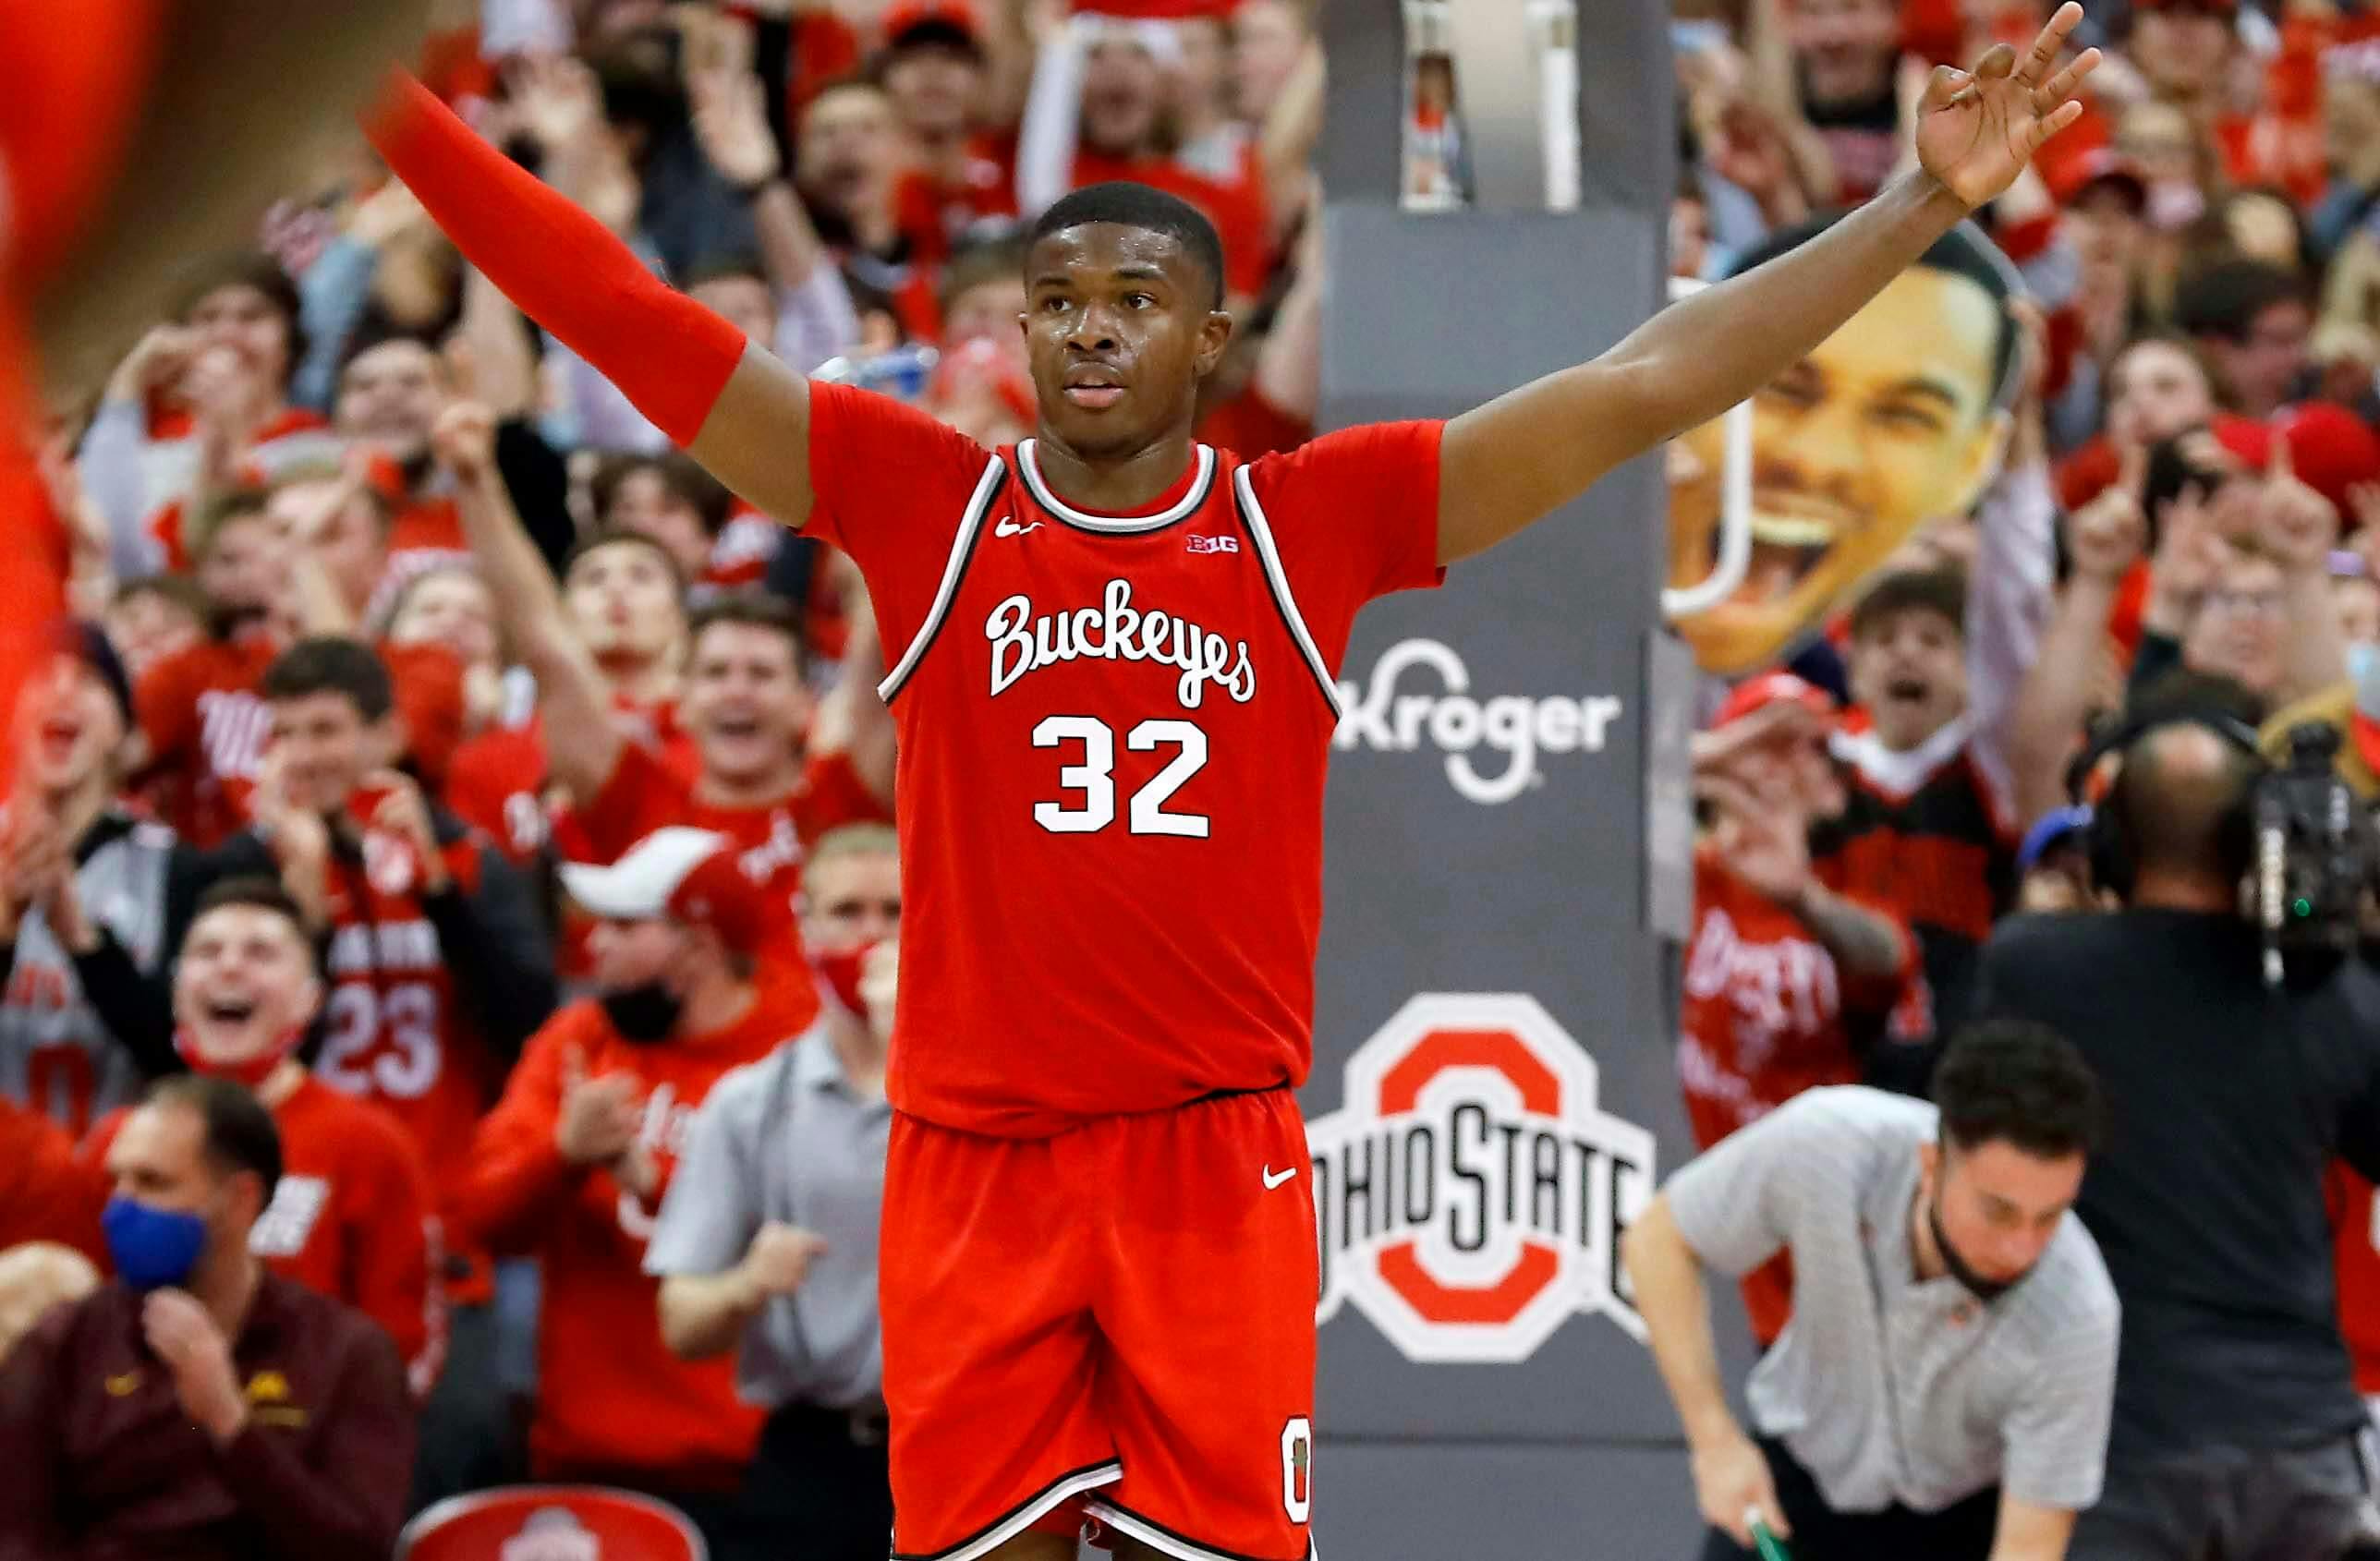 Ohio State Buckeyes forward E.J. Liddell (32) celebrates in the closing minutes of the win over the Duke Blue Devils at Value City Arena.